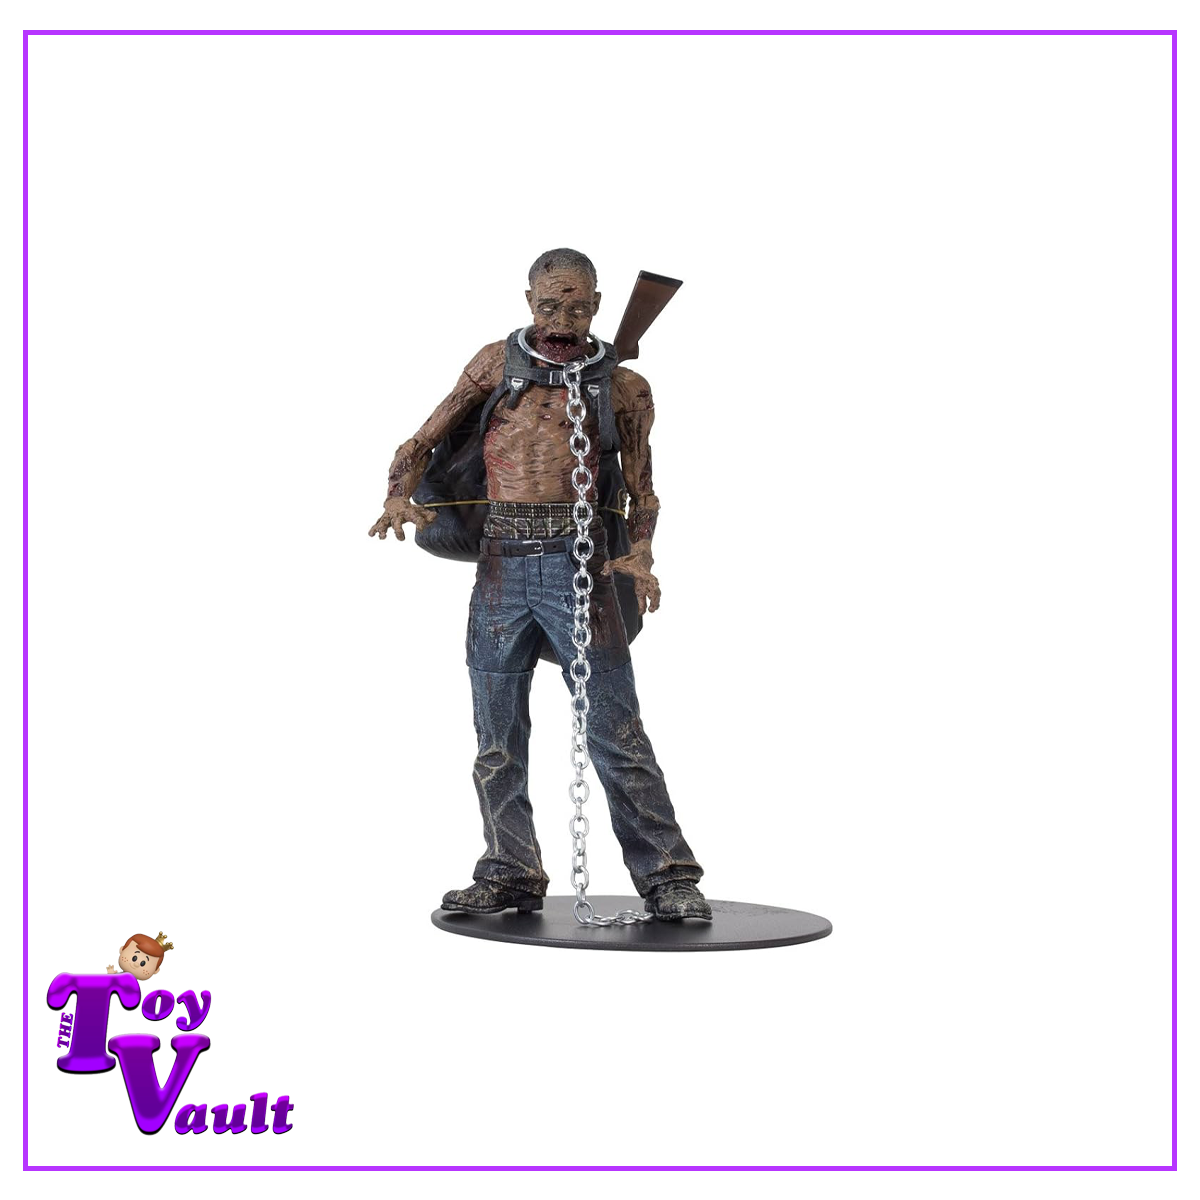 McFarlane Toys Horror The Walking Dead - Michonne's Pet 1 with Removable Jaw and Arms 6 inch Action Figure